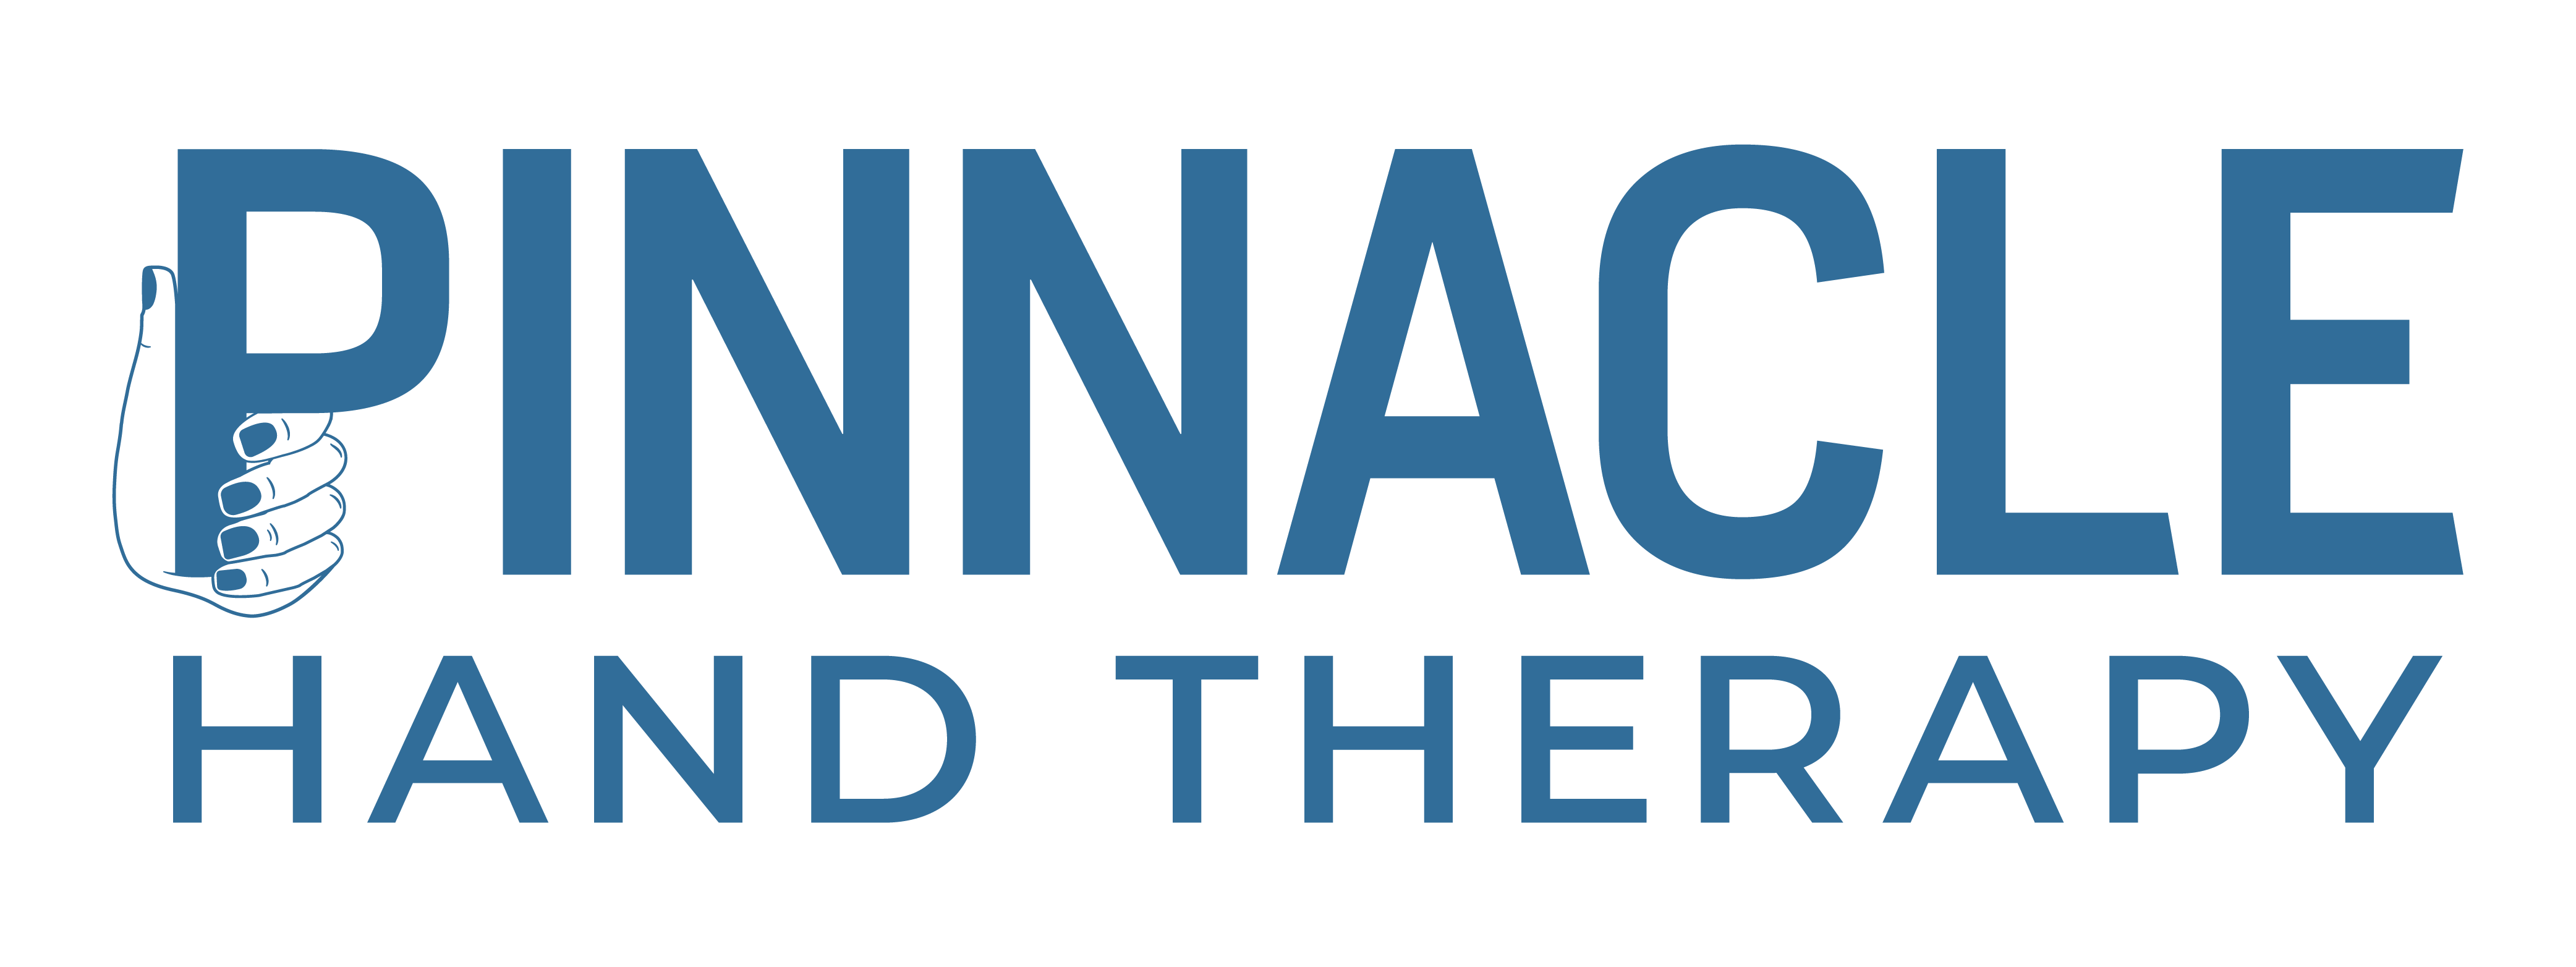 Pinnacle Hand Therapy